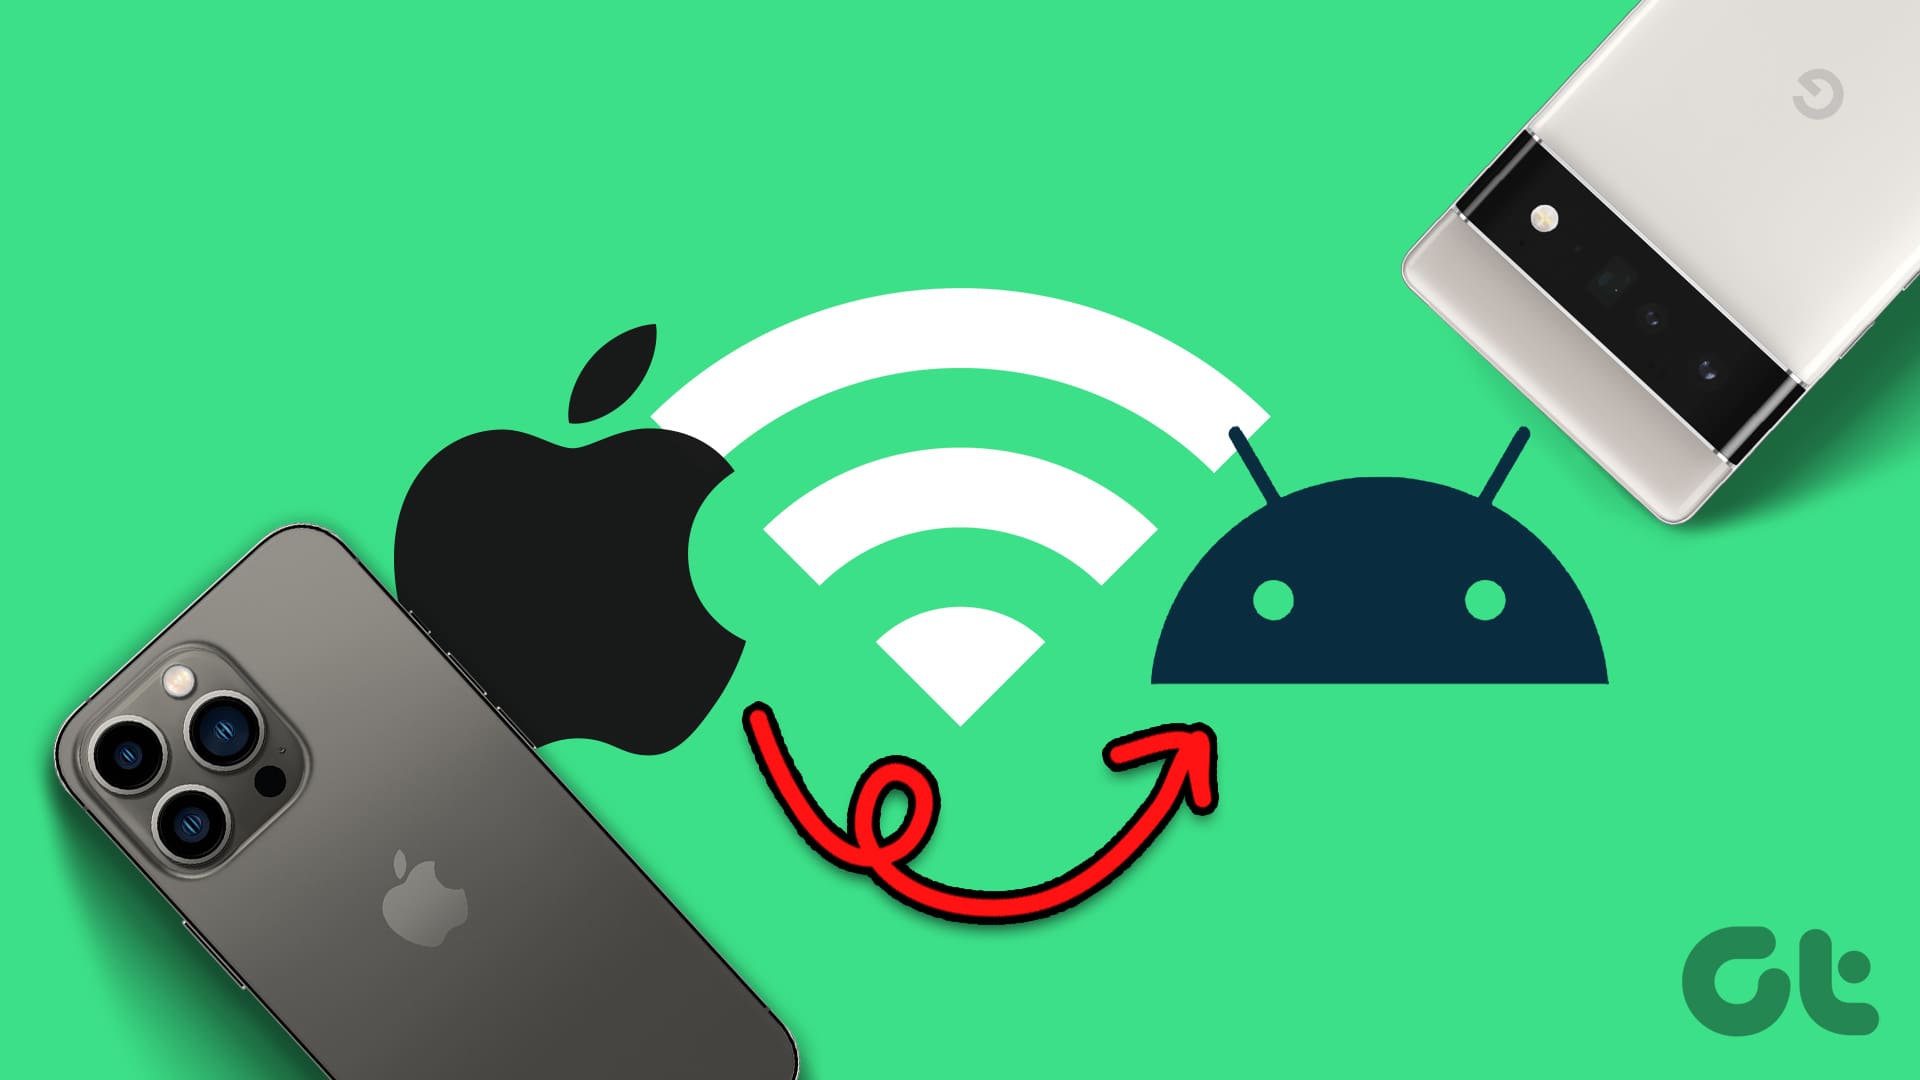 how to share wi-fi password from iPhone to Android